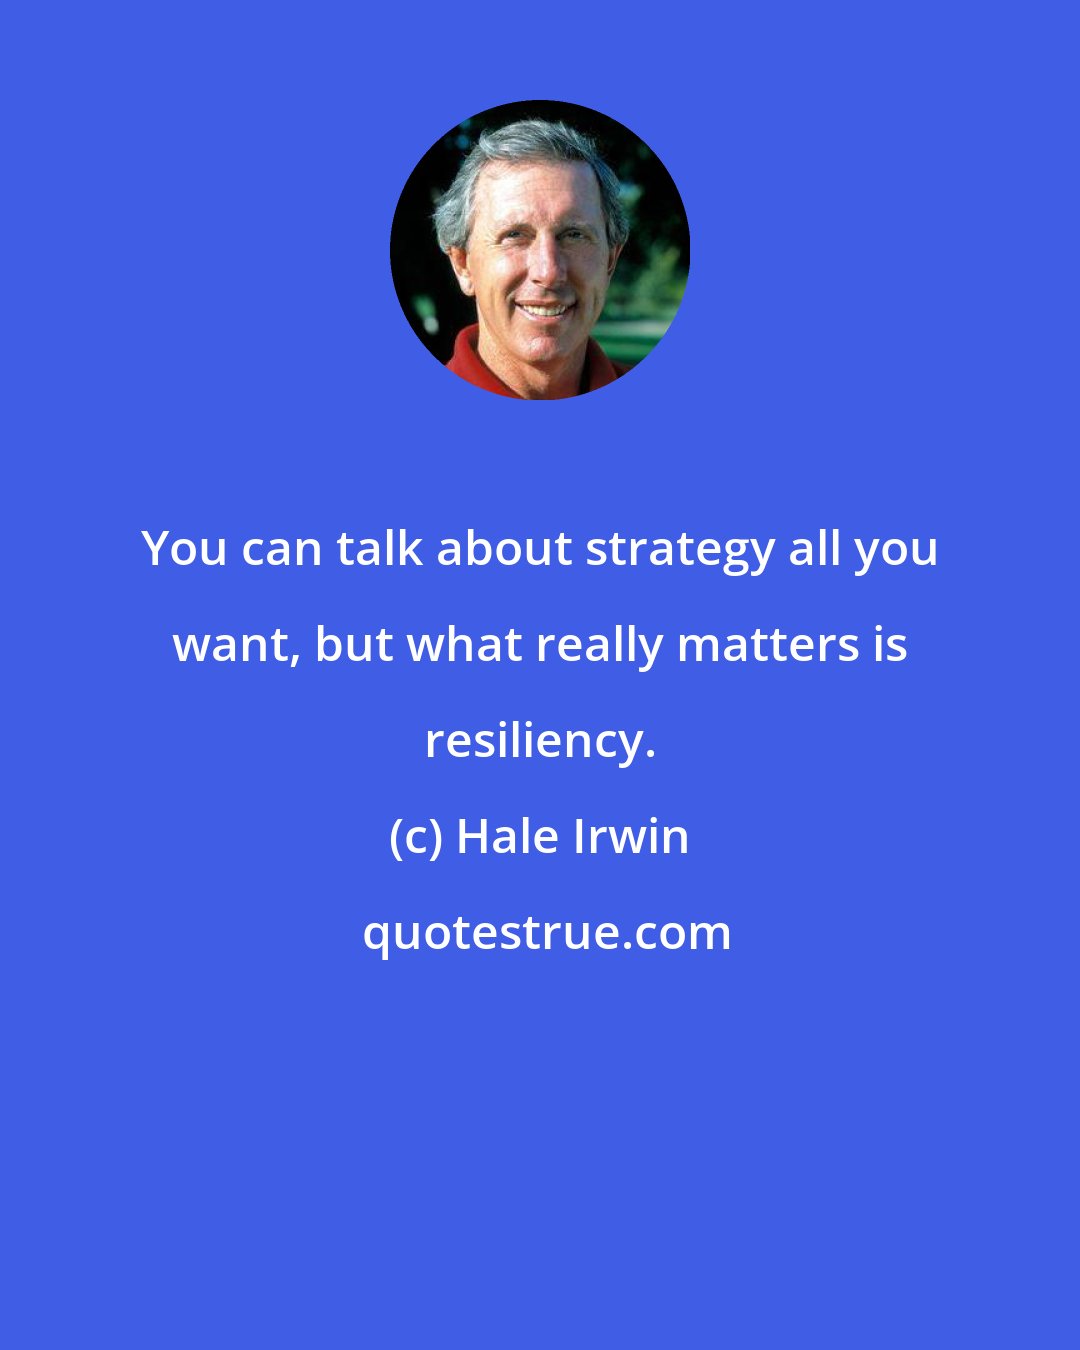 Hale Irwin: You can talk about strategy all you want, but what really matters is resiliency.